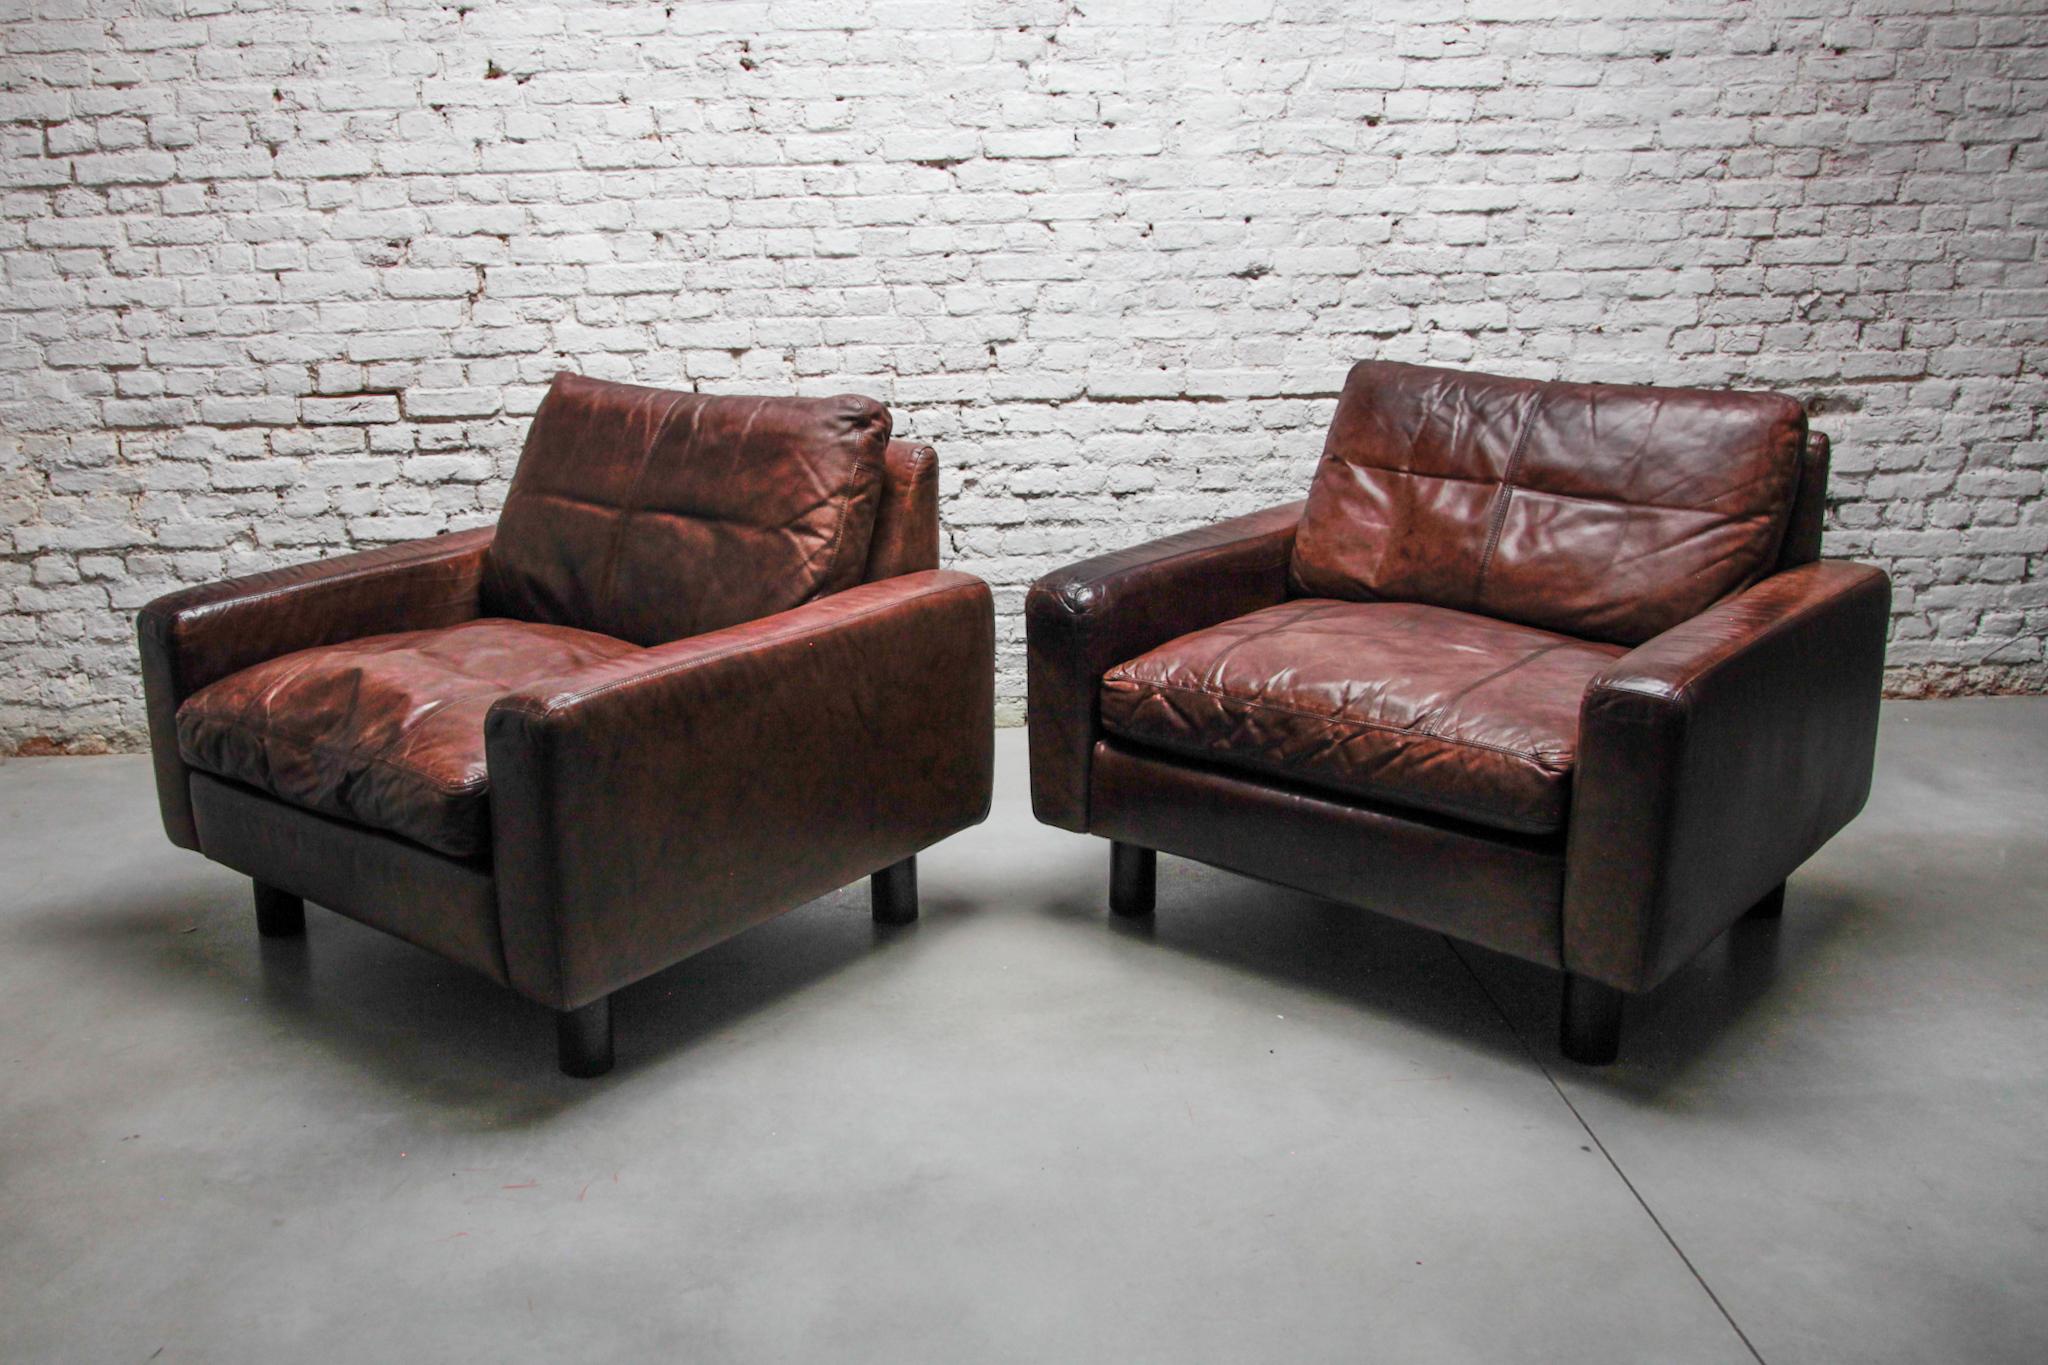 Comfortable set of two brown, grey leather lounge arm chairs designed manufactured by COR Germany, 1972. These brown, grey leather lounge chairs seats very comfortable and relaxing, the leather has a nice patina from age and usage. Also a matching